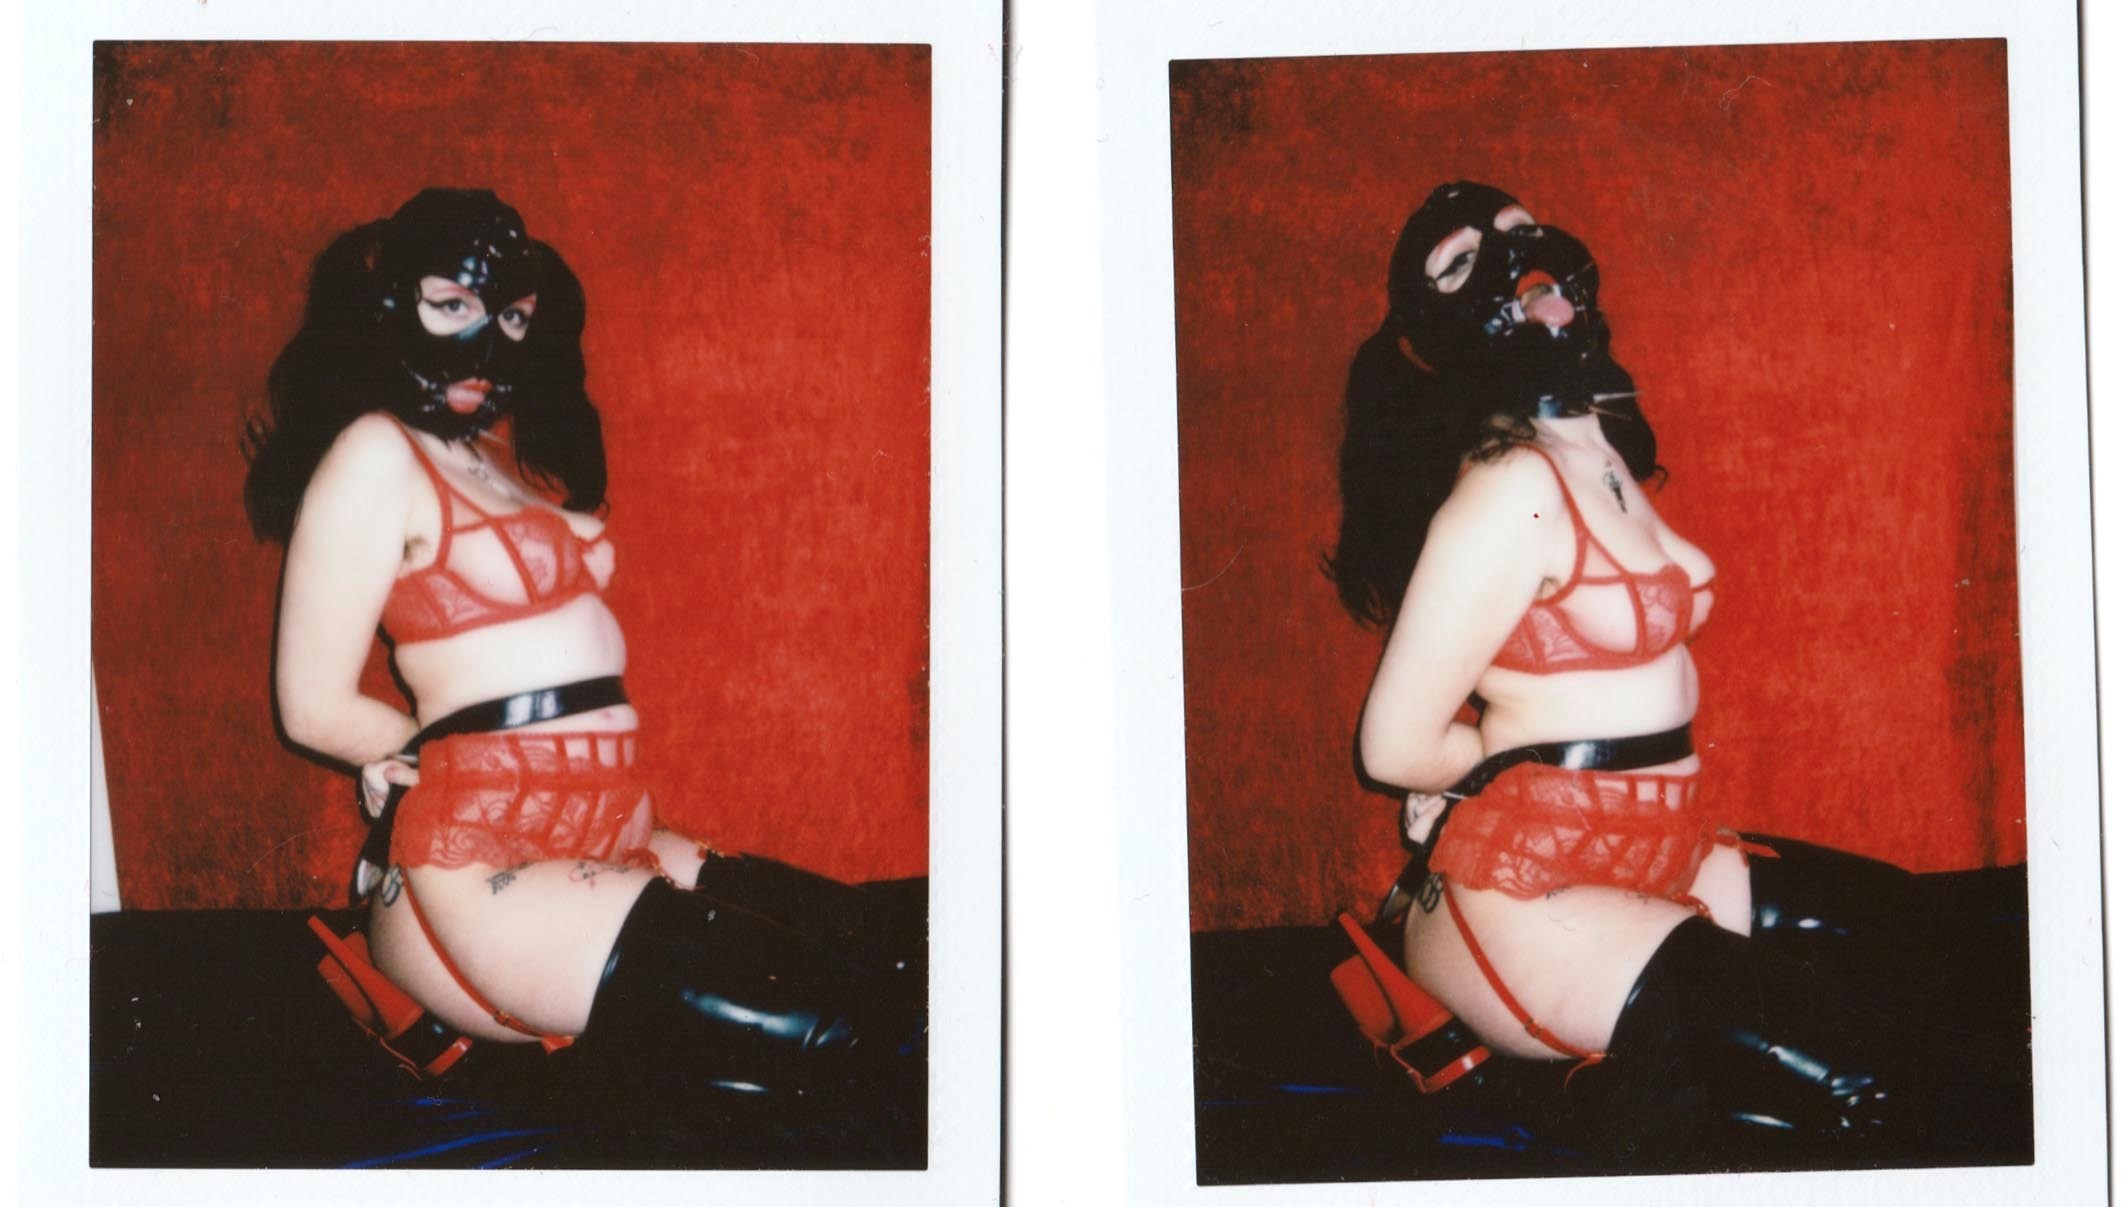 The photographers redefining the erotic image for the 21st century Dazed image picture